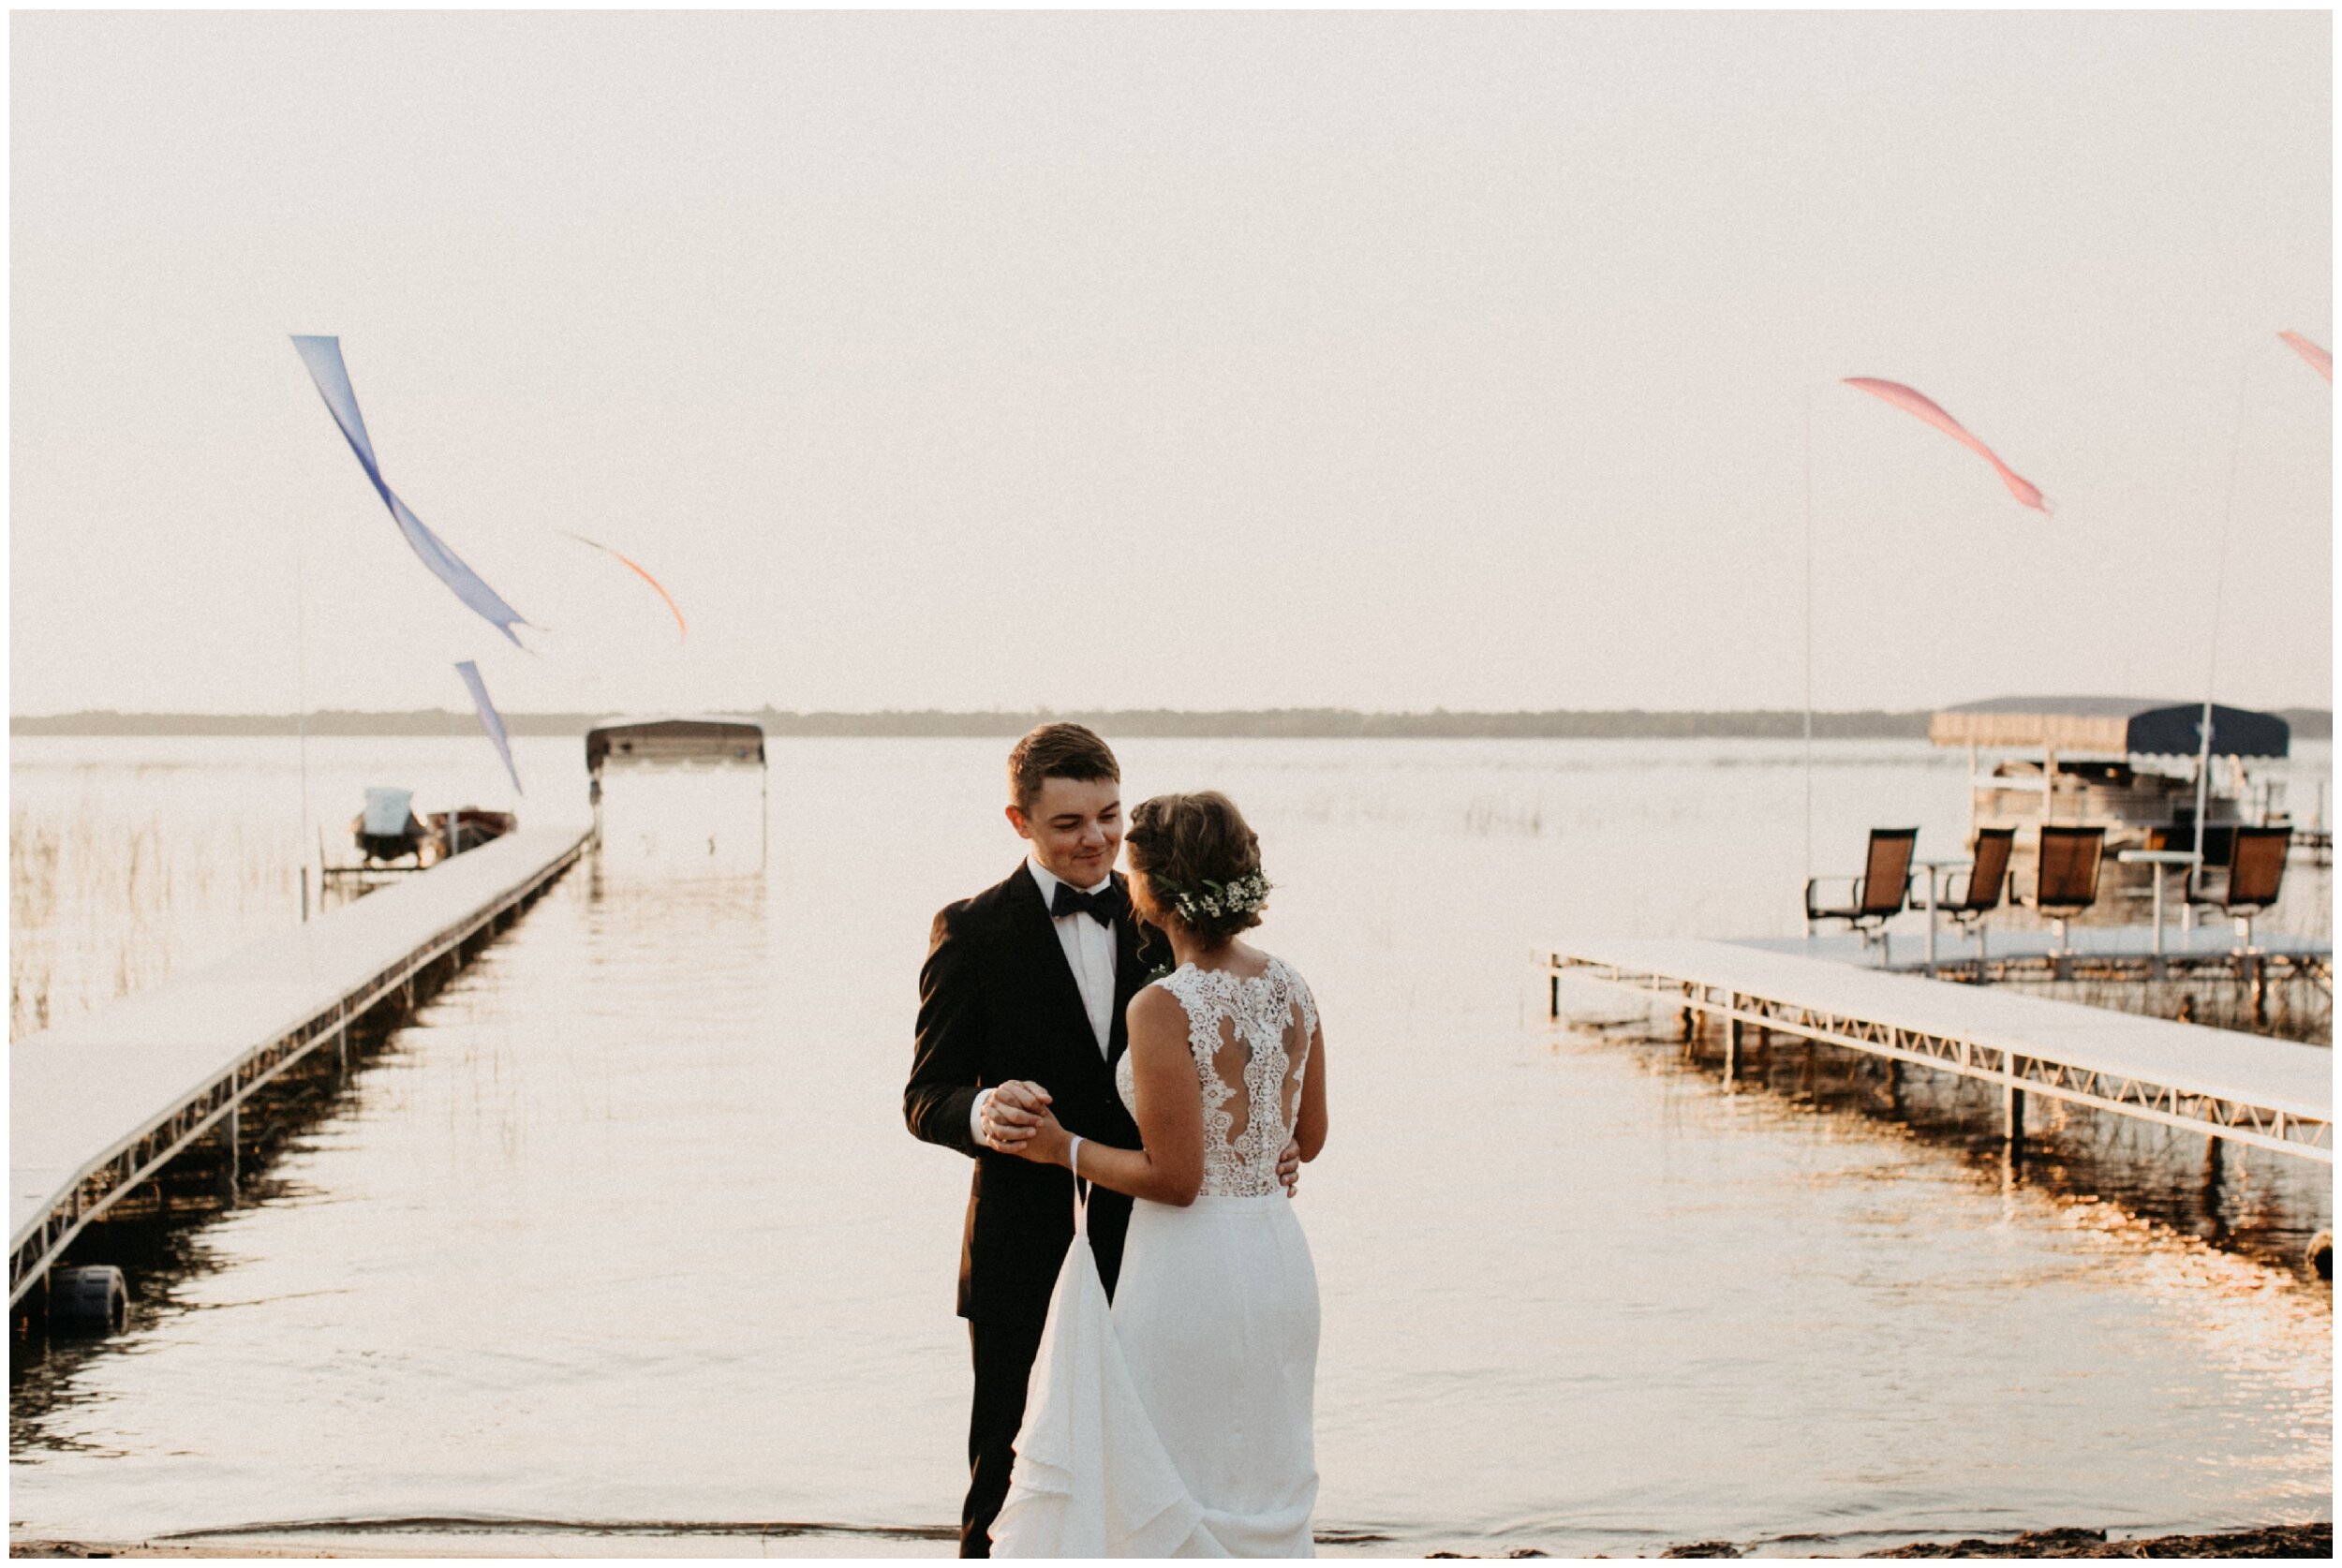 Bride and groom dancing by lake during sunset in Brainerd, Minnesota